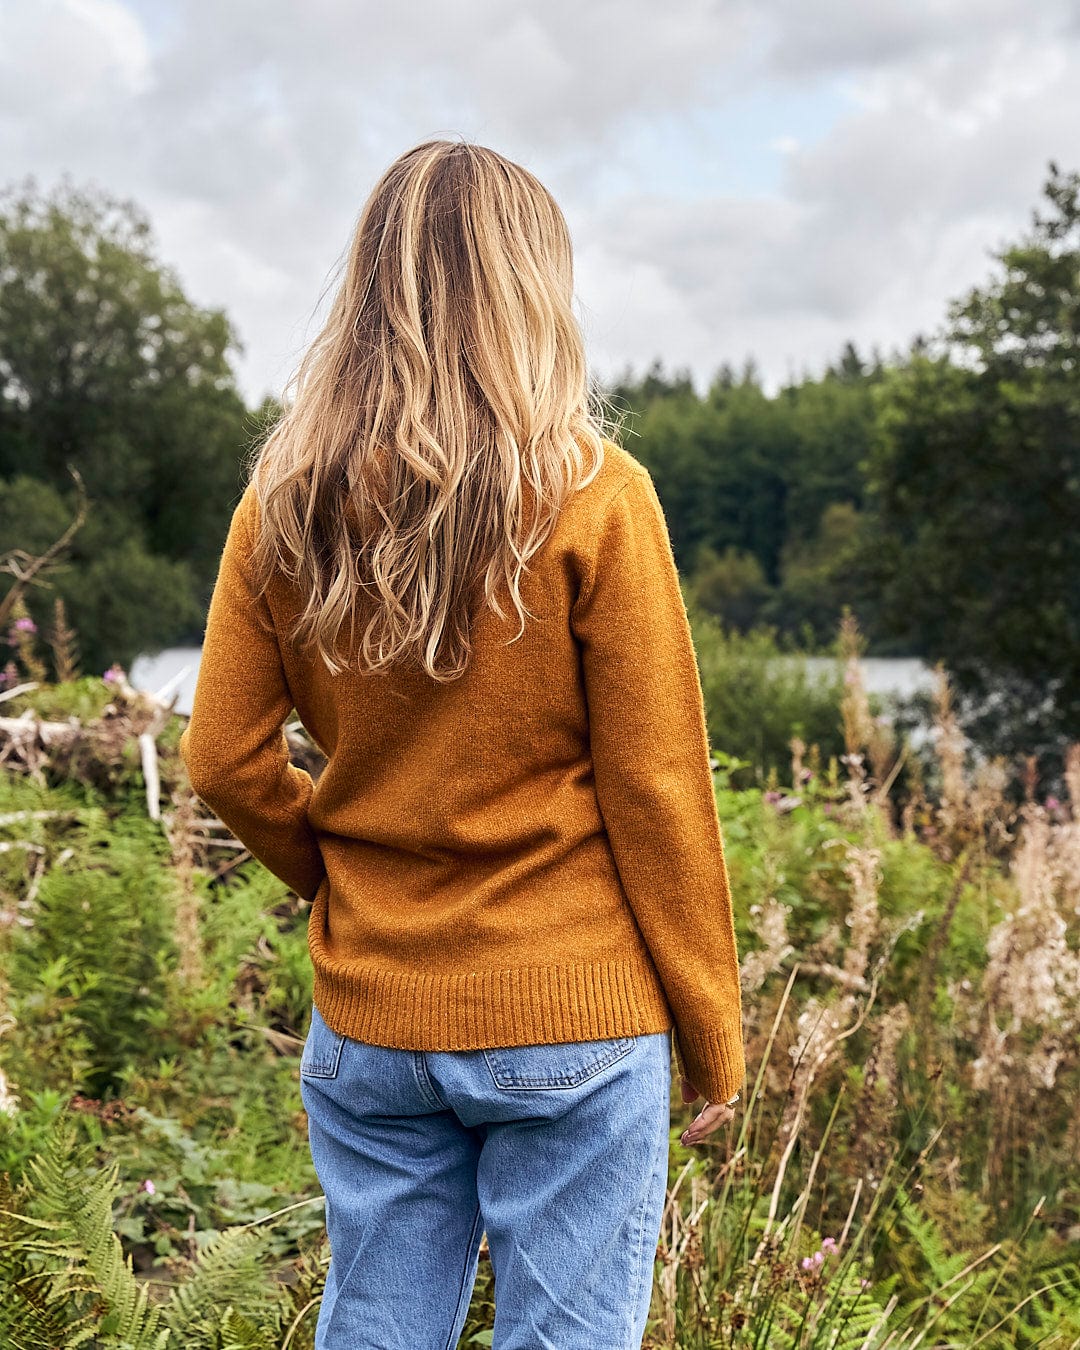 A woman standing in a field wearing a Saltrock Hele Bay 2 - Womens Knitted Jumper - Yellow sweater and jeans.